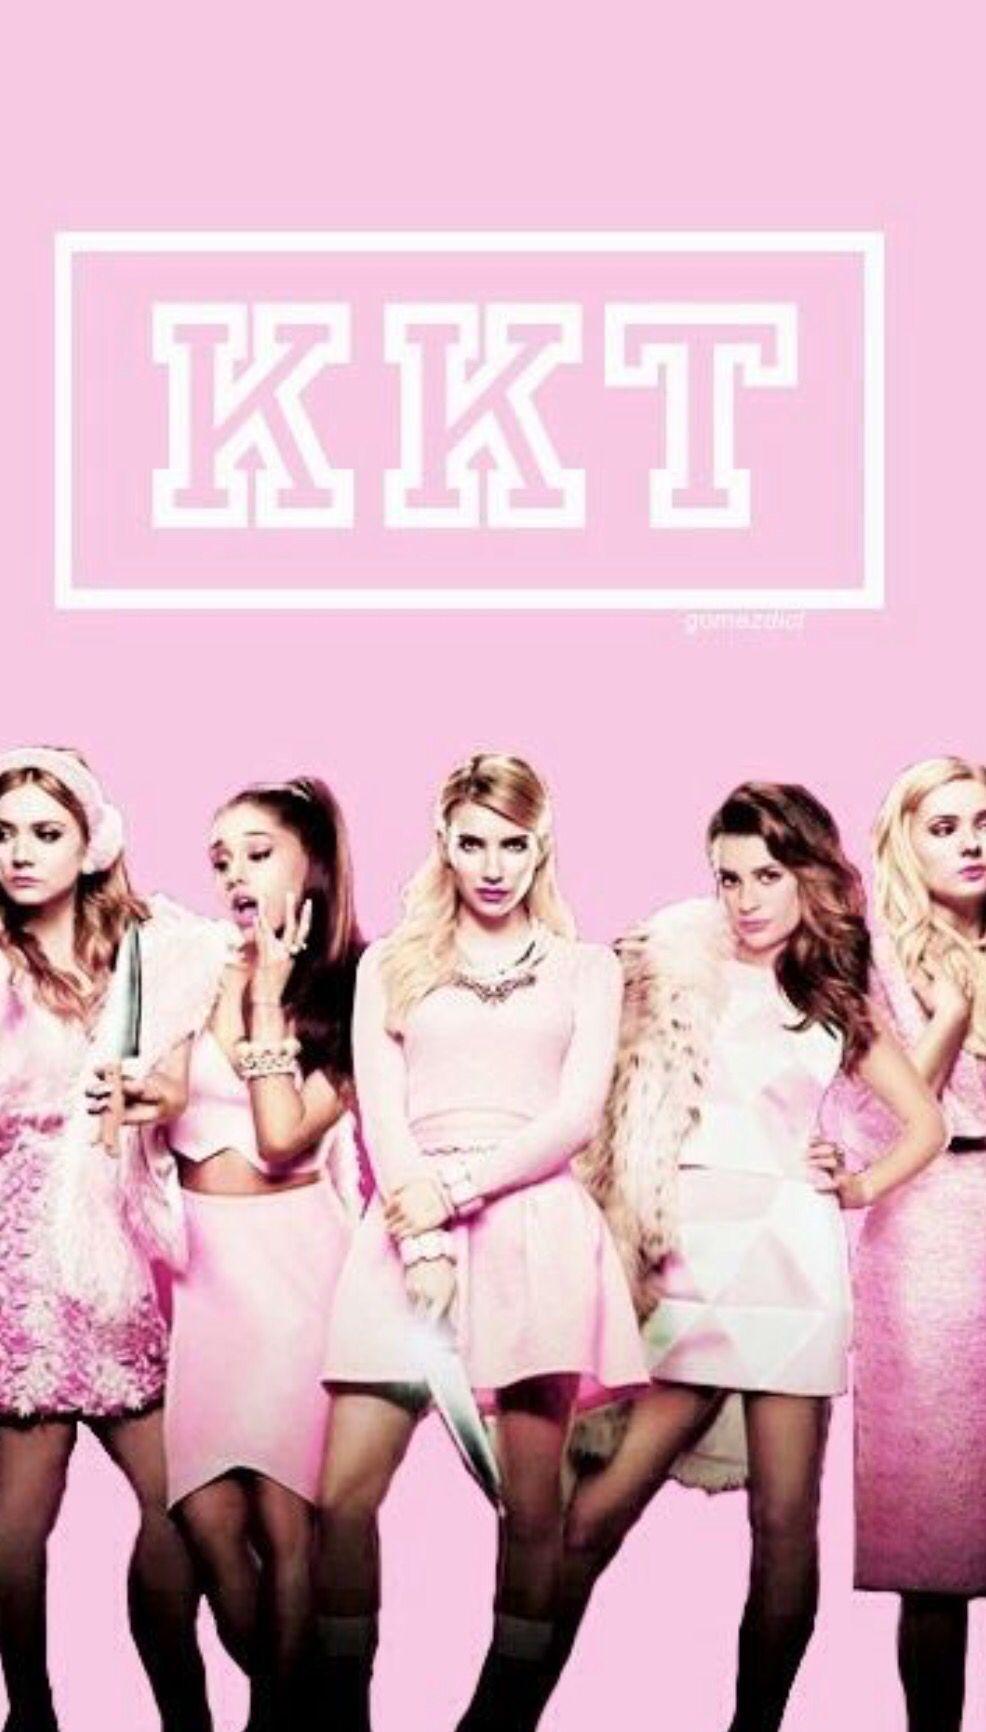 Scream queens wallpaper # fave show ❤. ♡ anything girly